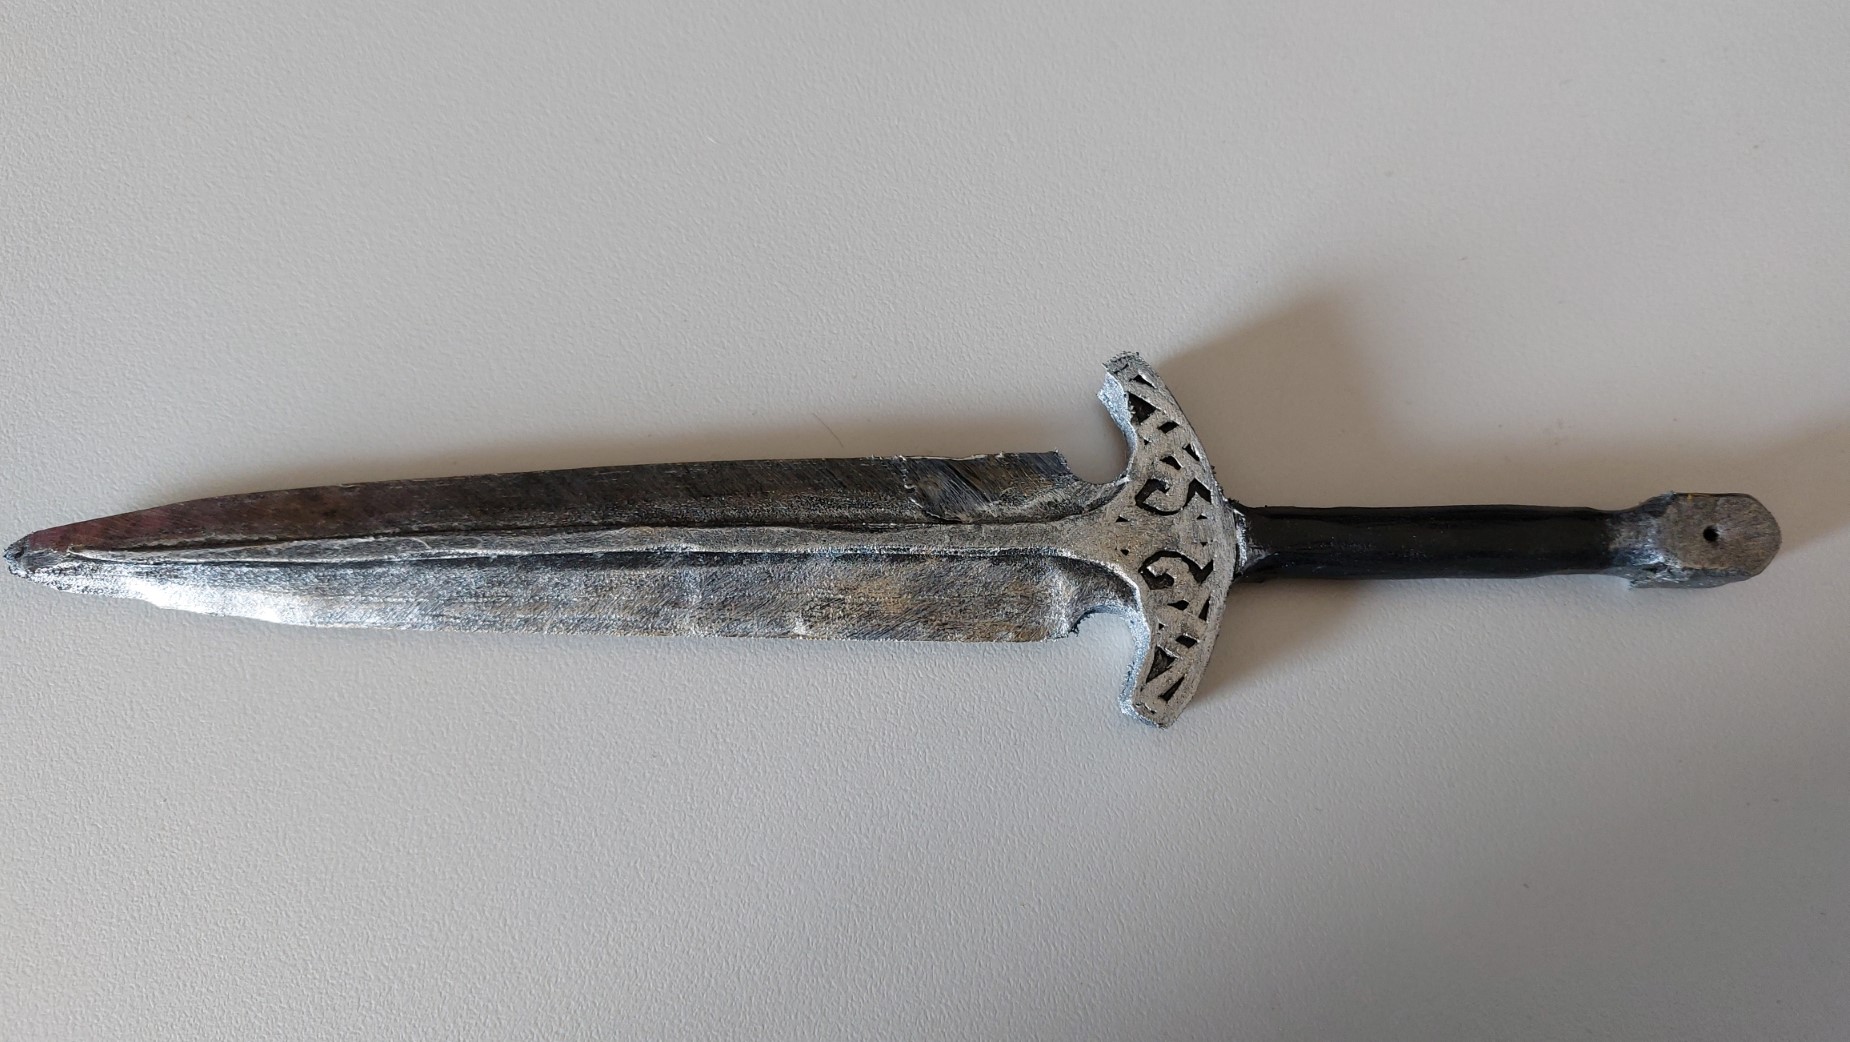 Other side of the completed dagger